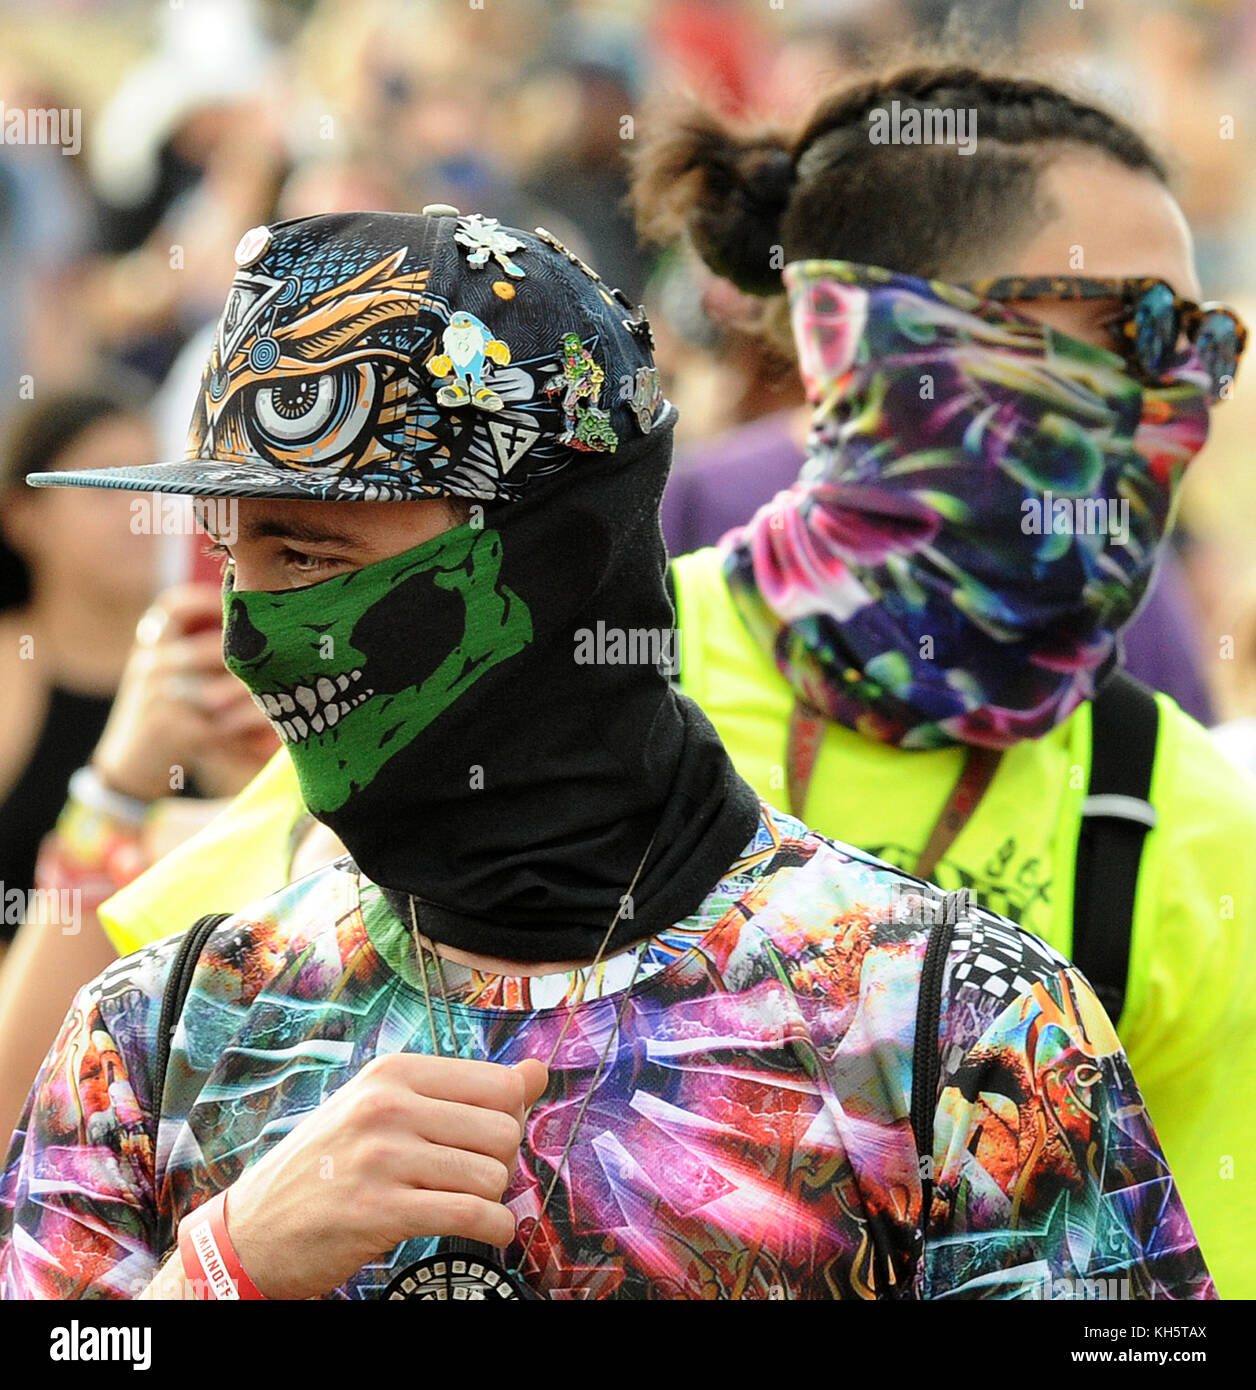 Orlando, United States. 11th Nov, 2017. Two men wear bandana face masks at  the Electric Daisy Carnival, the largest electronic dance music festival in  the United States, on November 11, 2017 at